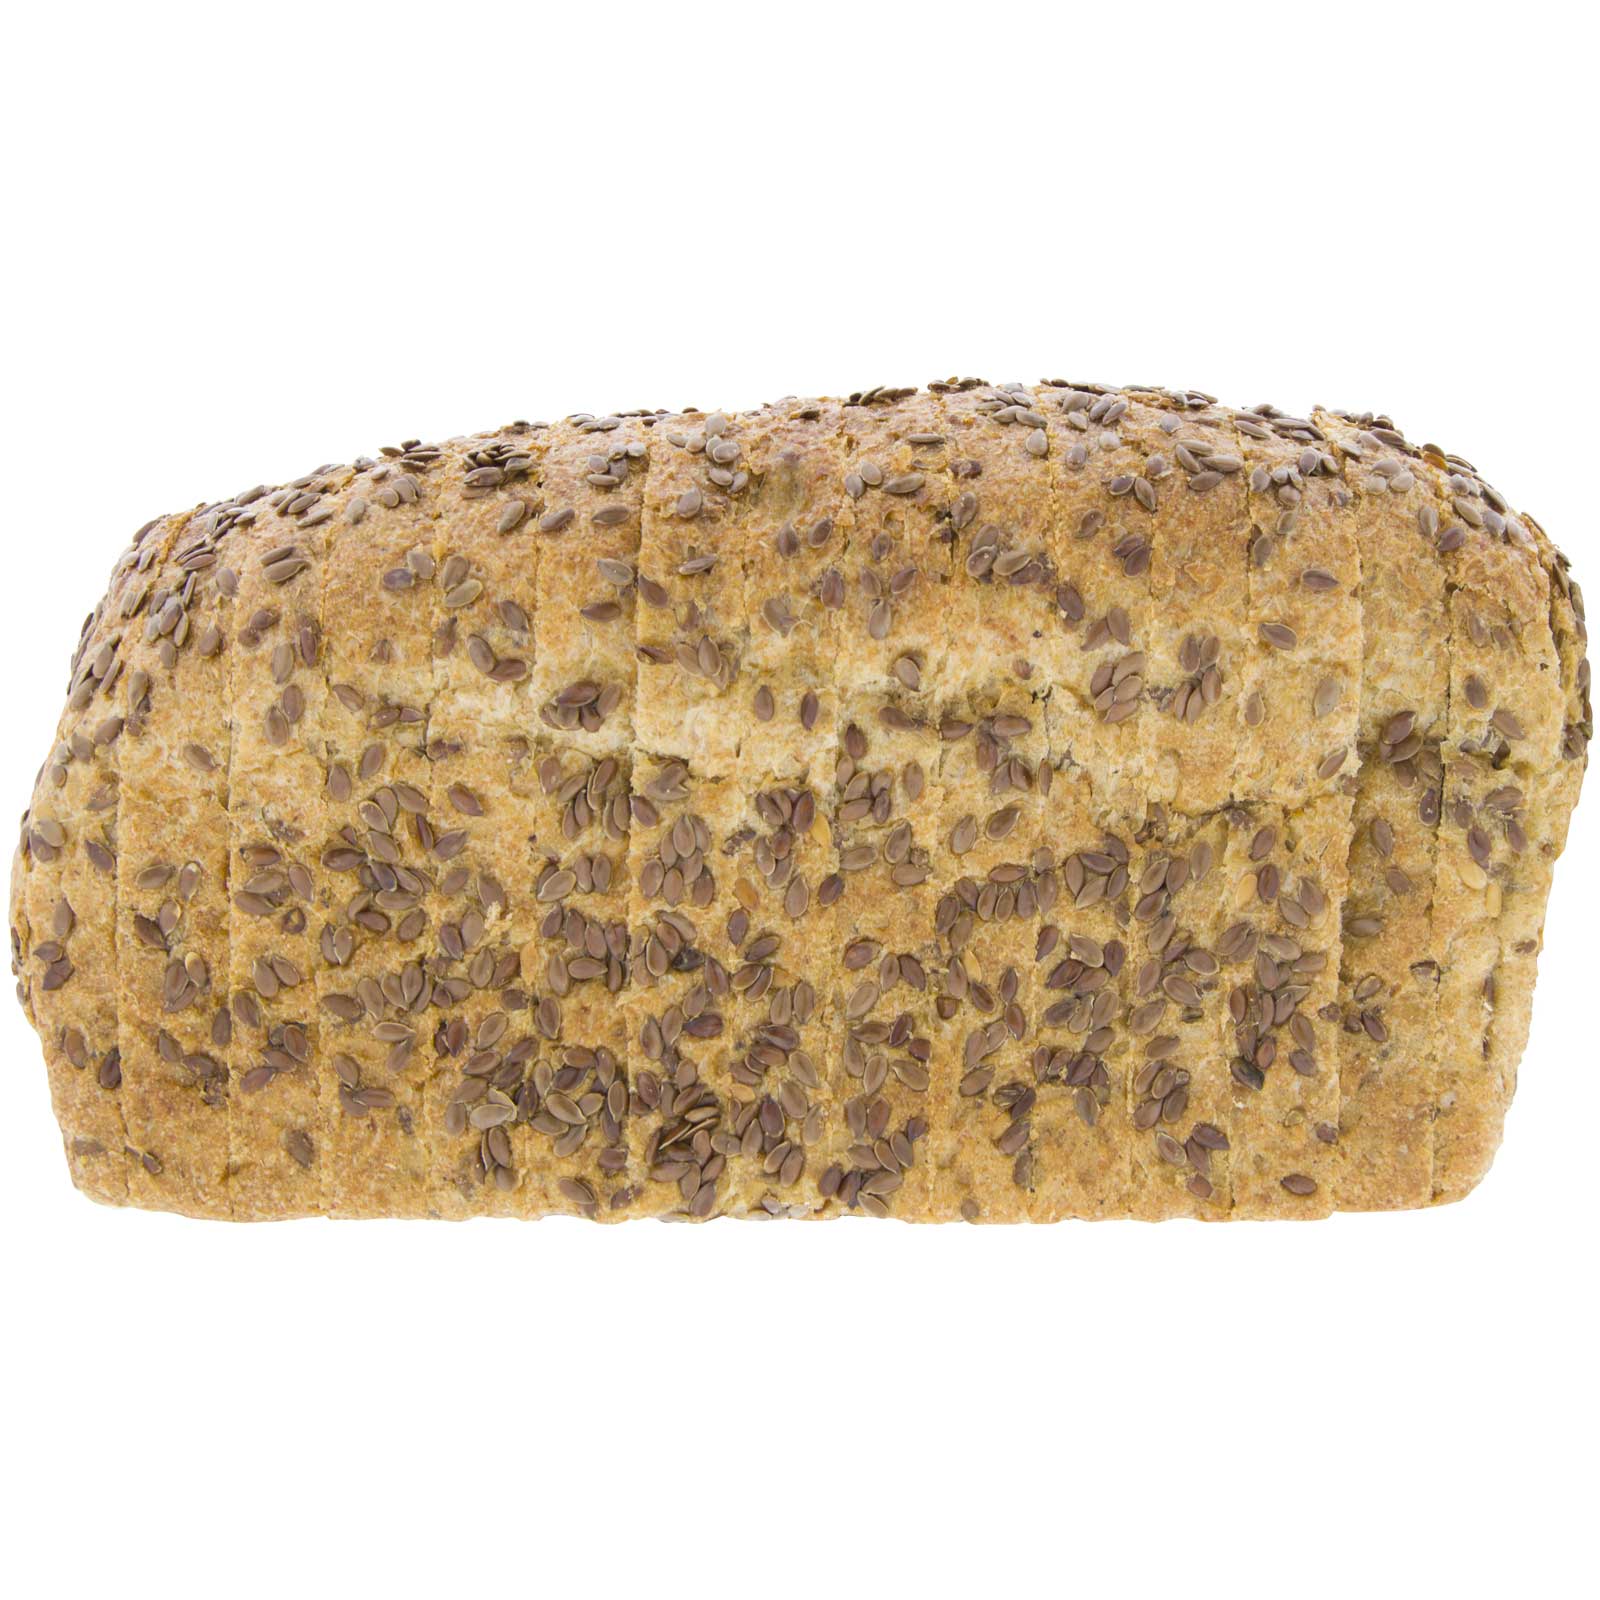 Integral rye mold bread with ecological 450g flaxse